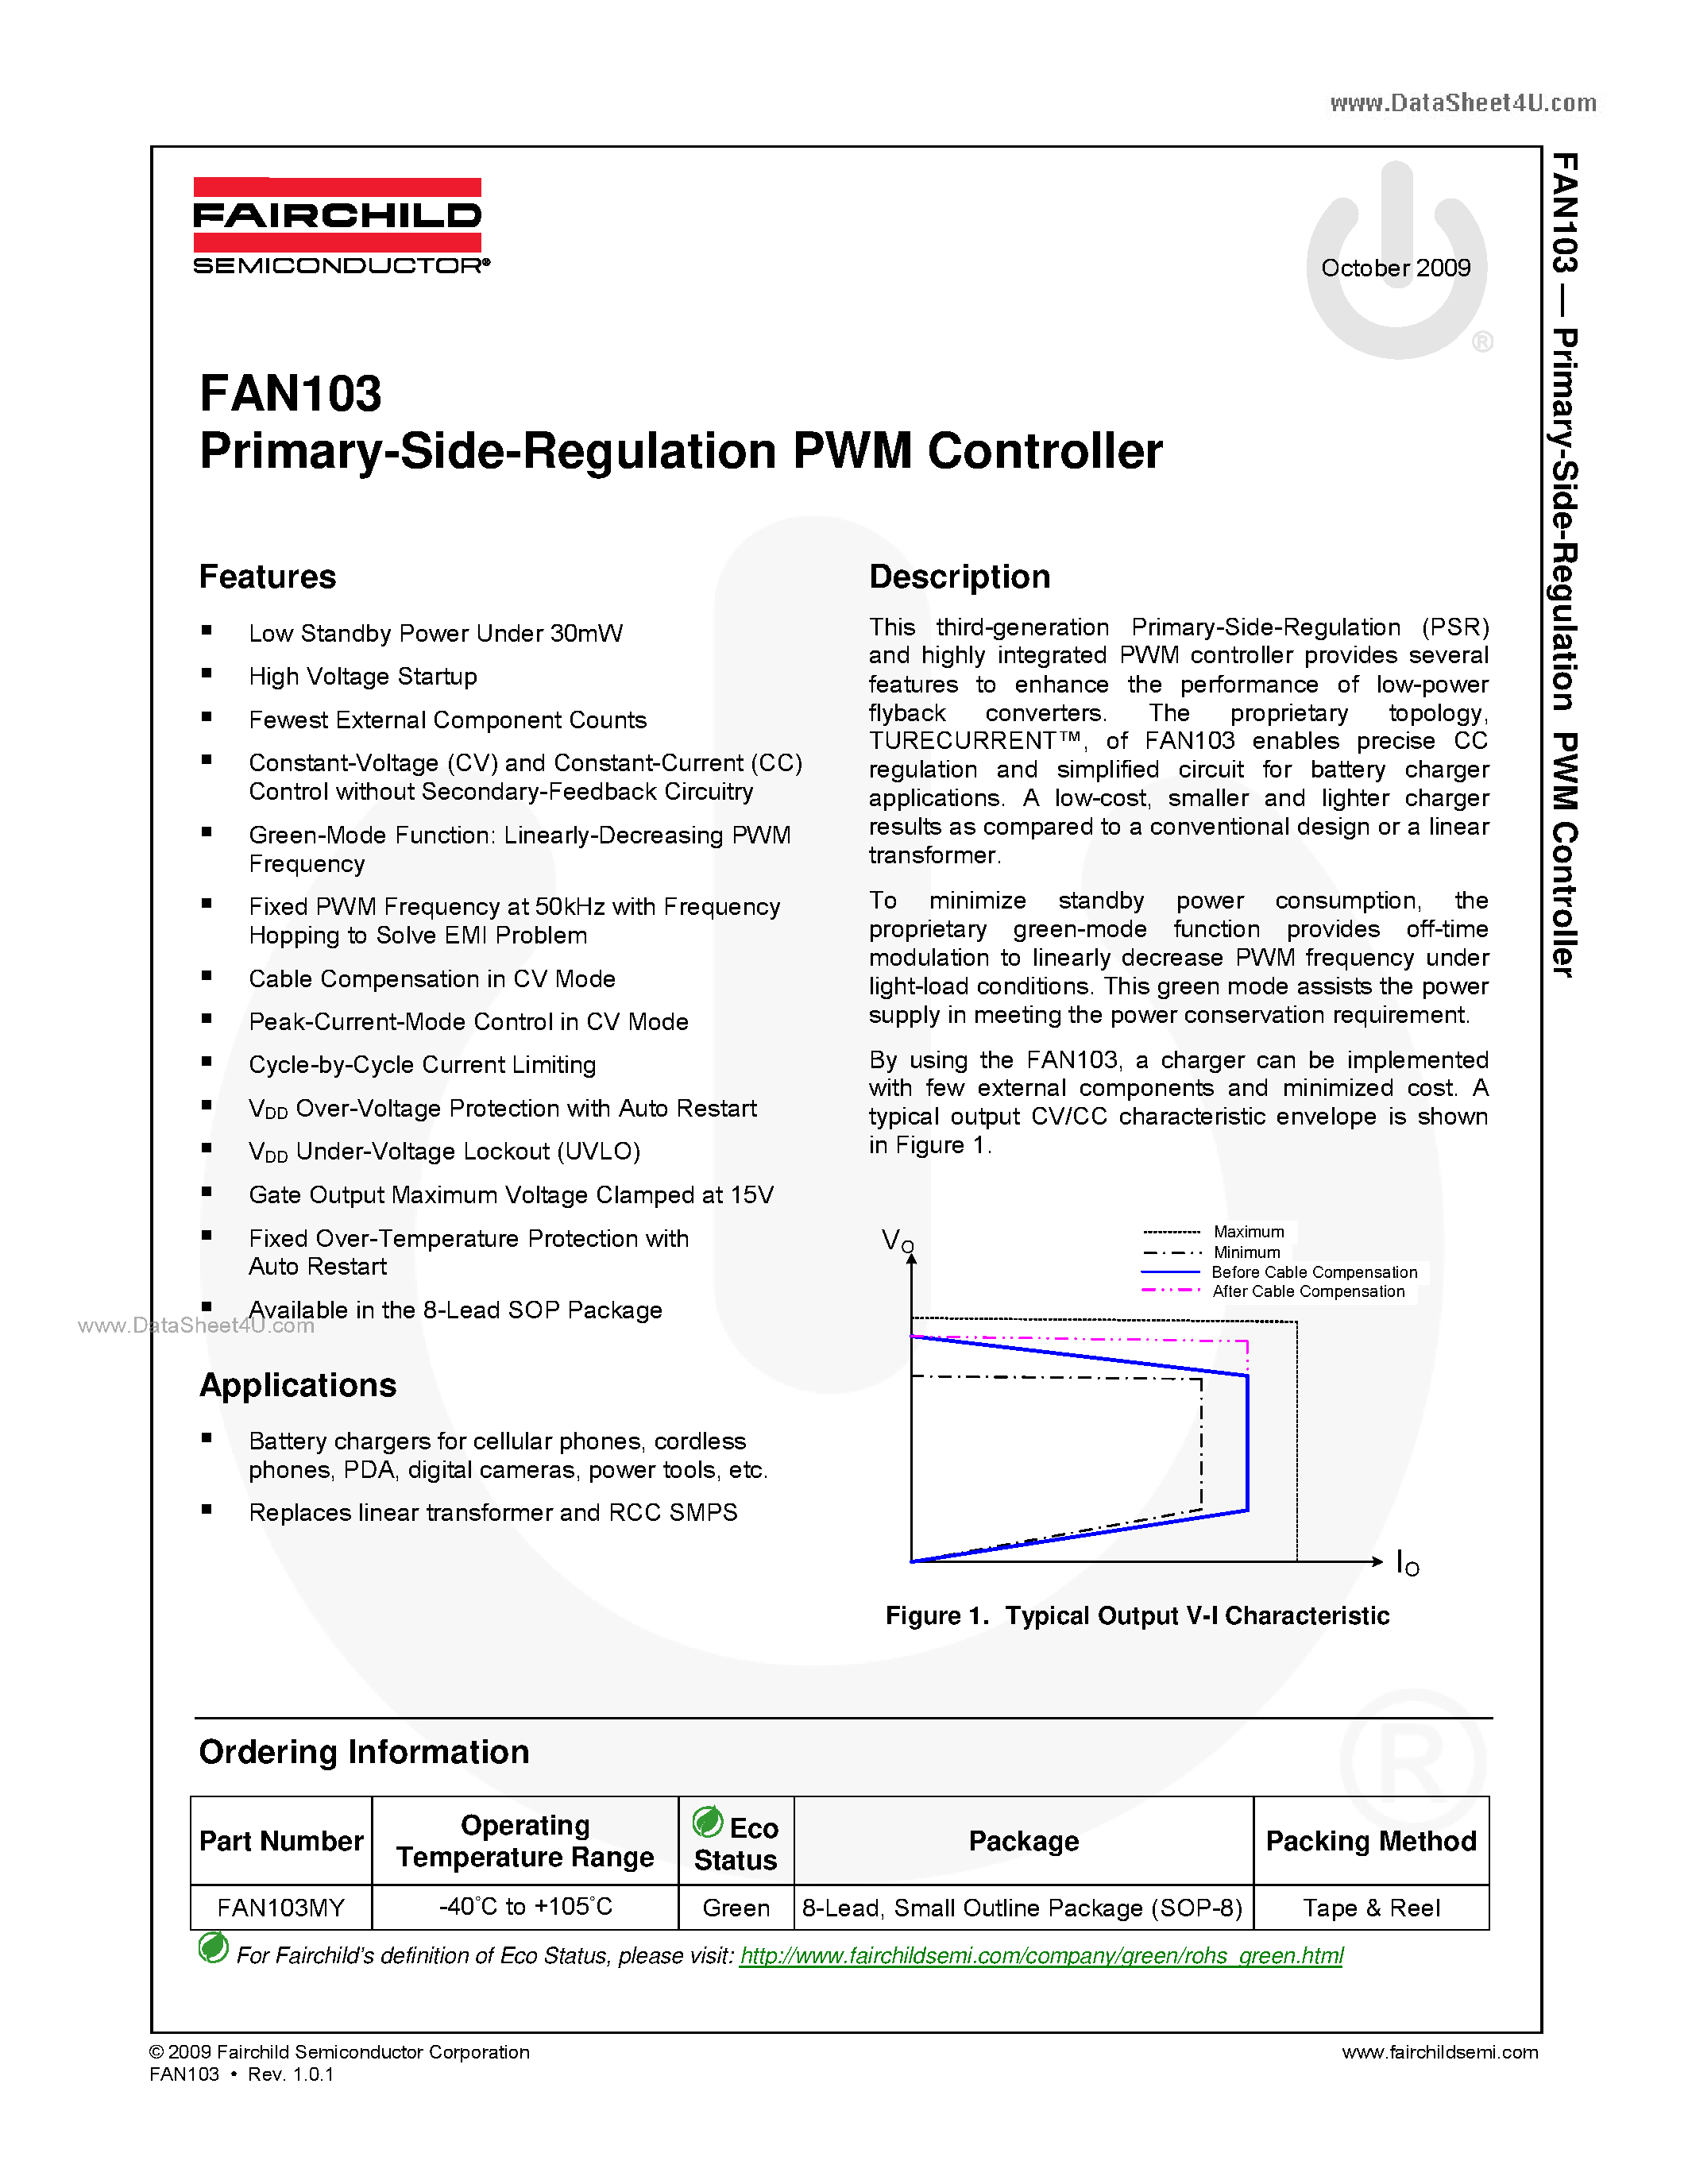 Datasheet FAN103 - Primary-Side-Regulation PWM Controller page 1